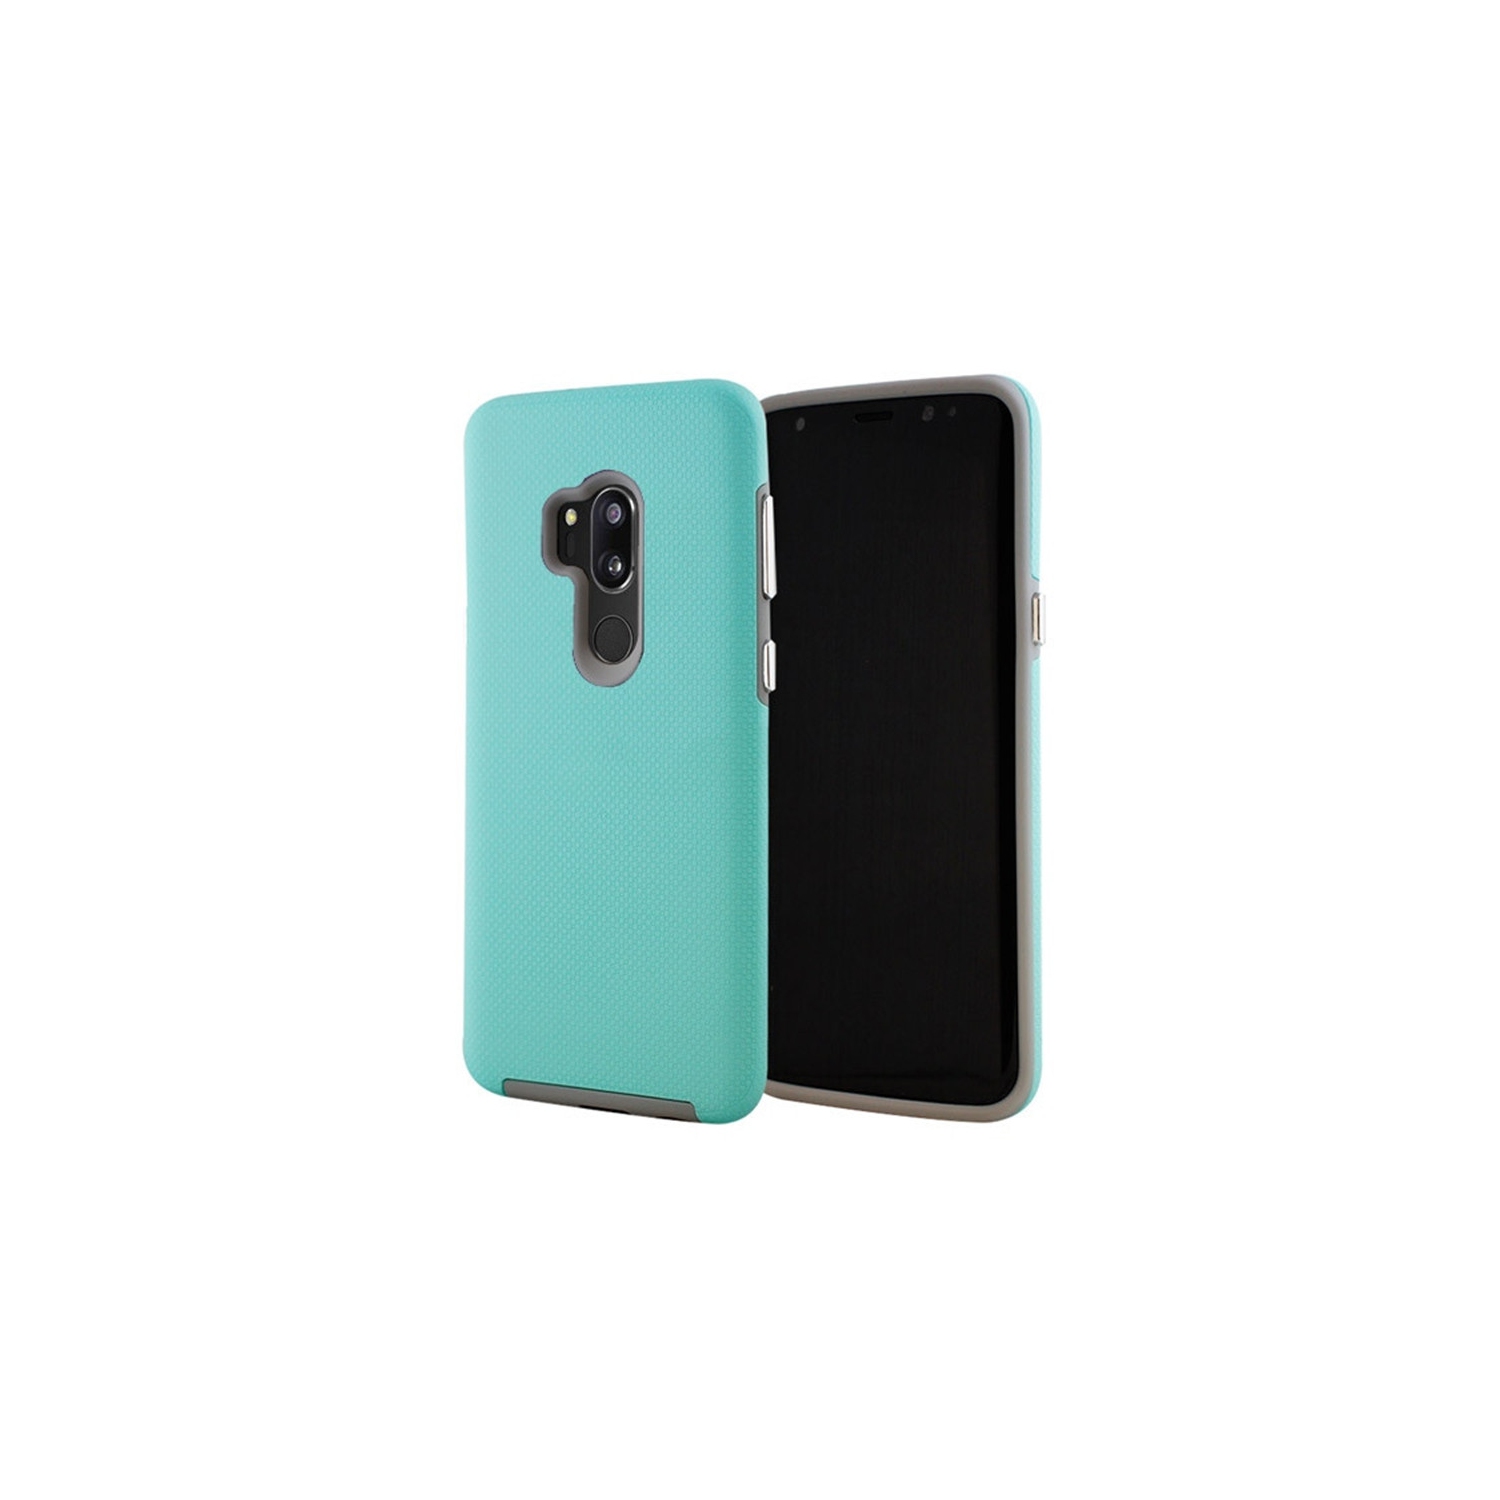 【CSmart】 Slim Fitted Hybrid Hard PC Shell Shockproof Scratch Resistant Case Cover for LG G7 ThinQ / G7 One, Mint